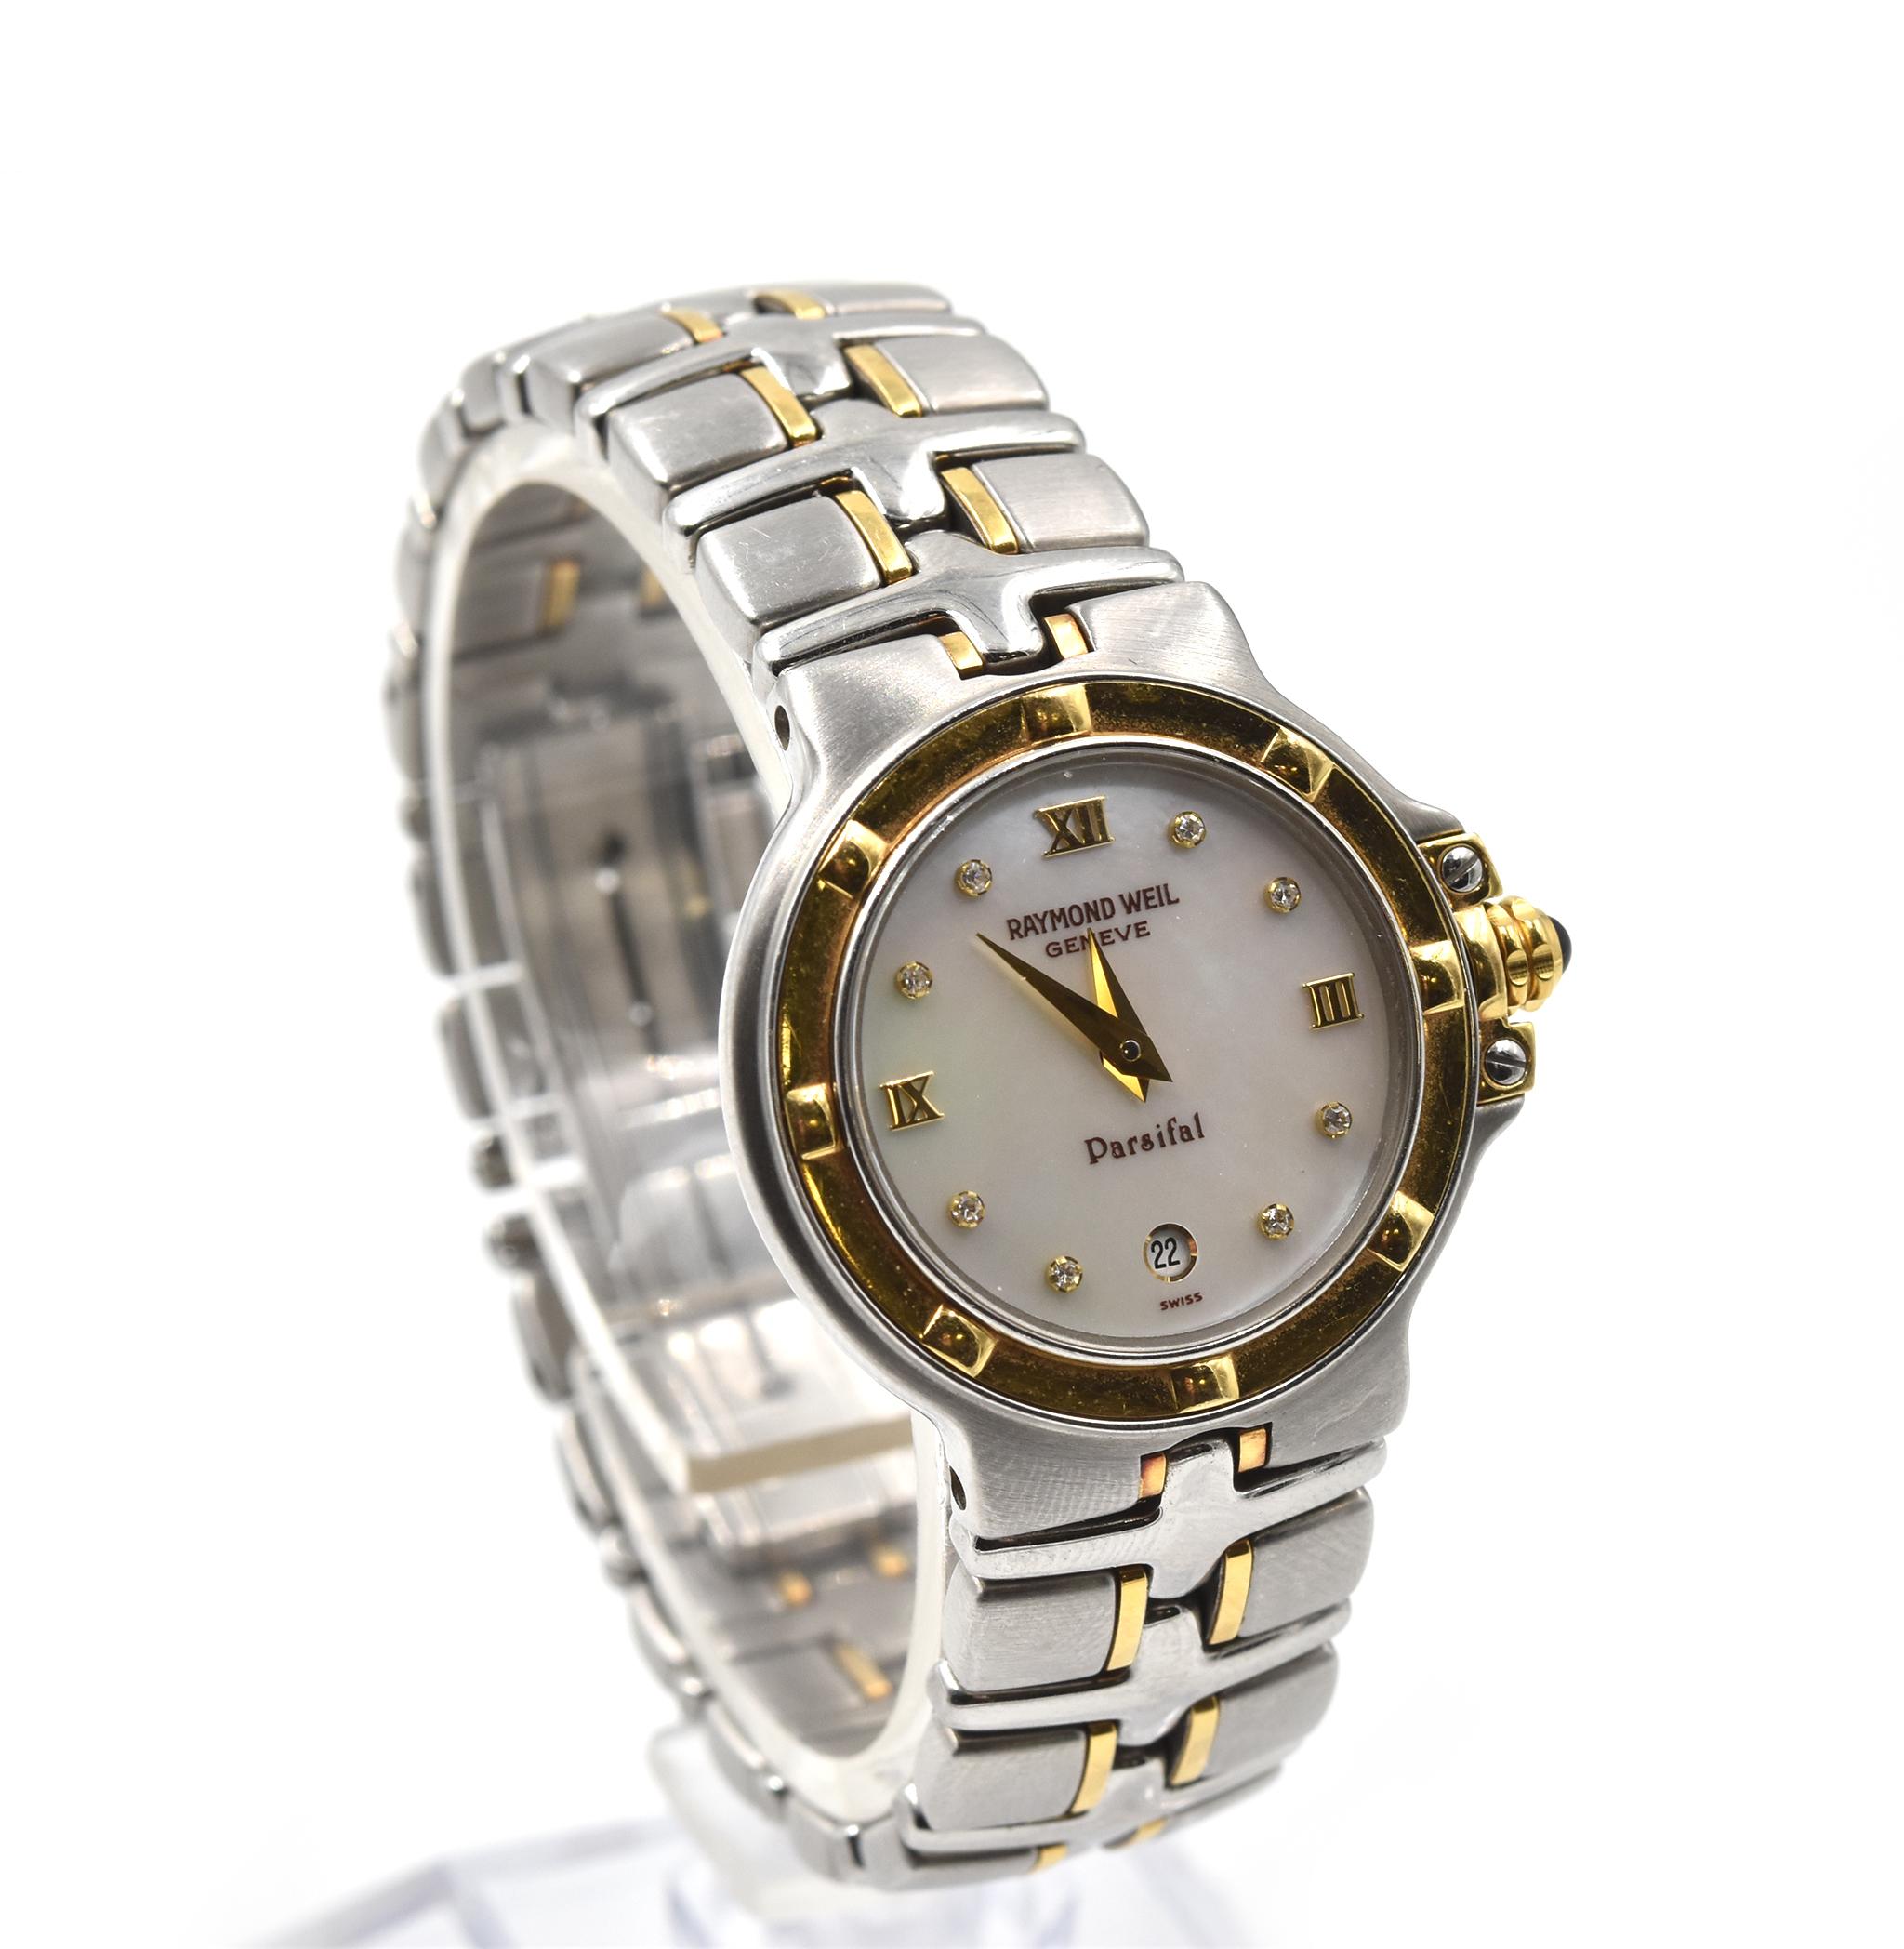 
Movement: quartz
Function: hours, minutes, date
Case: 26mm without the crown; 30mm with the crown, stainless steel case with fixed steel bezel, sapphire protective crystal, pull/push crown, water resistant
Band: two-tone stainless steel 
Dial: MOP